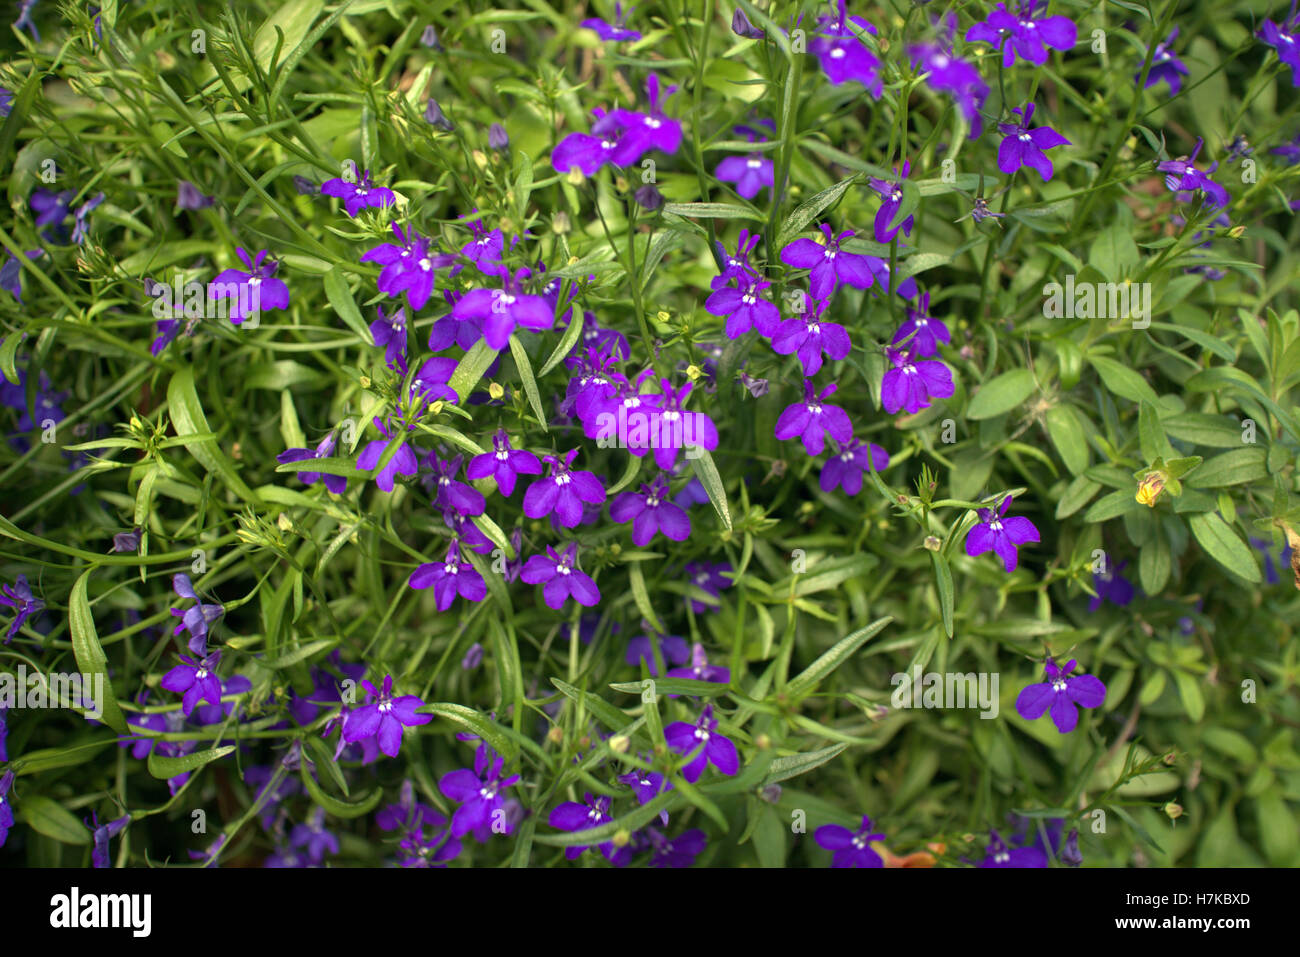 hanging basket flowers in close up Stock Photo